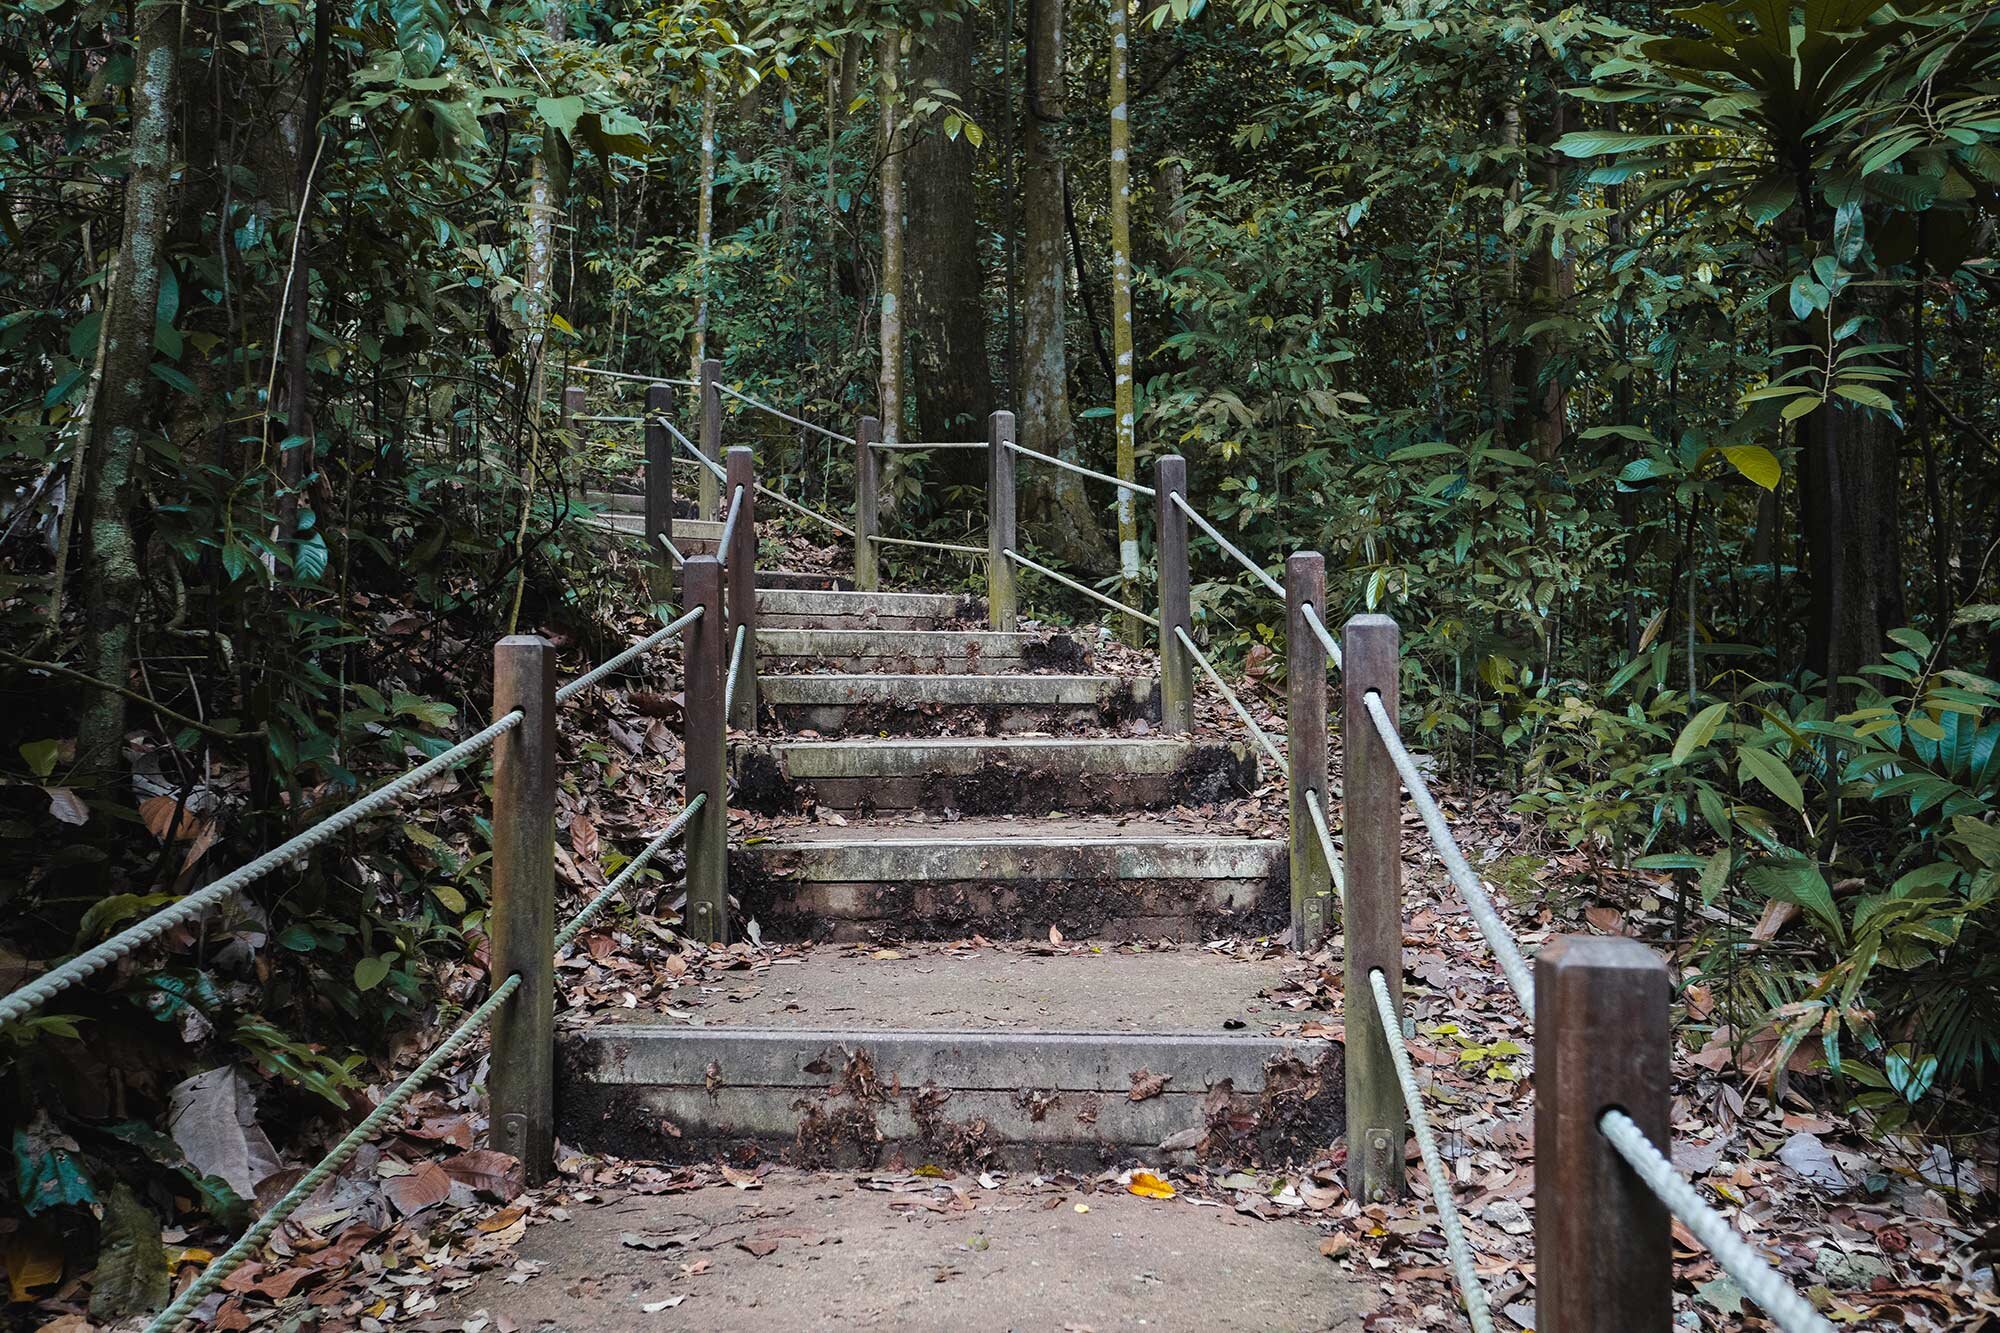 A flight of&nbsp;stairs&nbsp;stretching up to the top of&nbsp;Bukit Timah&nbsp;Hill.